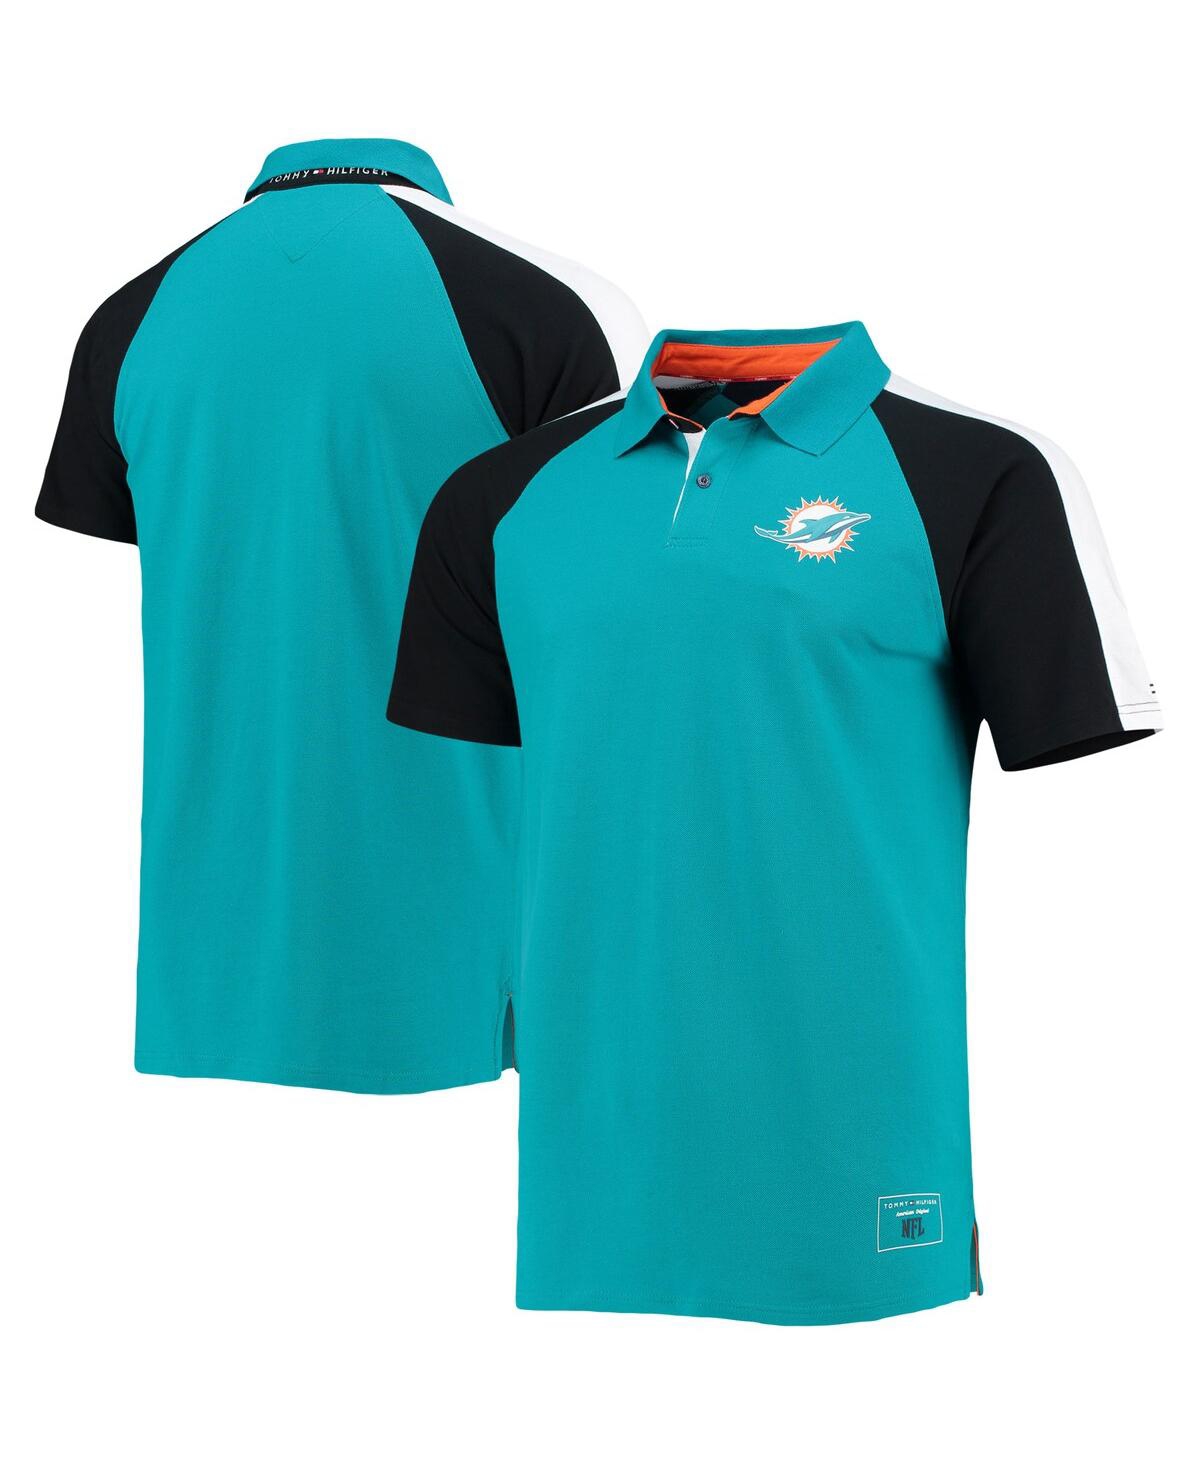 UPC 195195410519 product image for Men's Tommy Hilfiger Aqua and White Miami Dolphins Holden Raglan Polo Shirt | upcitemdb.com